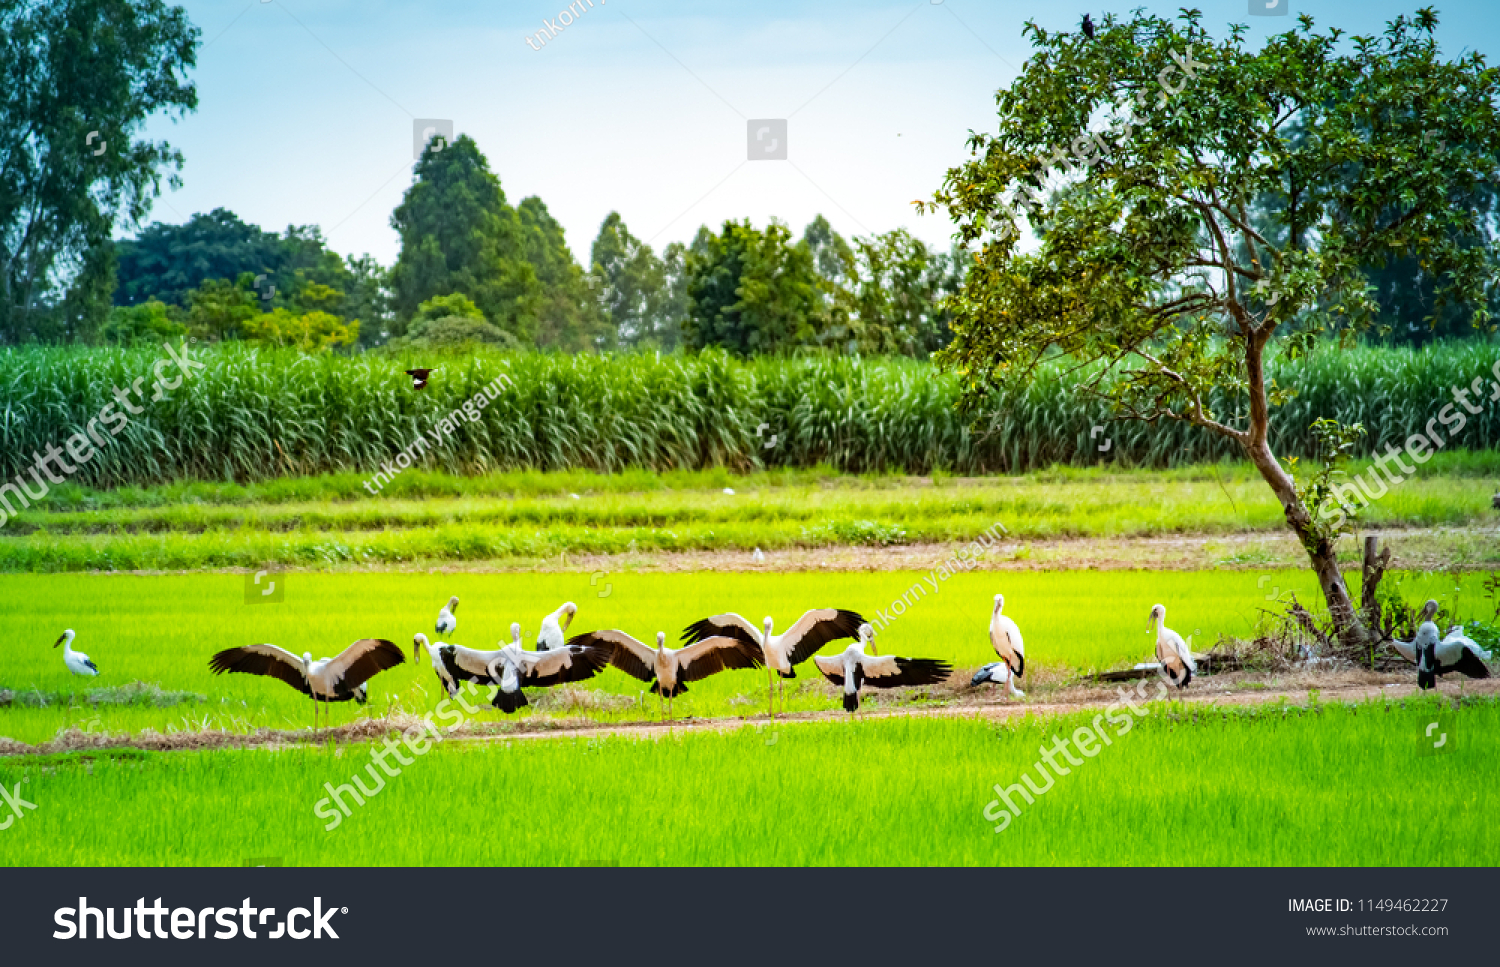 Anastomus oscitans, local birds living in the countryside of Thailand.  #1149462227